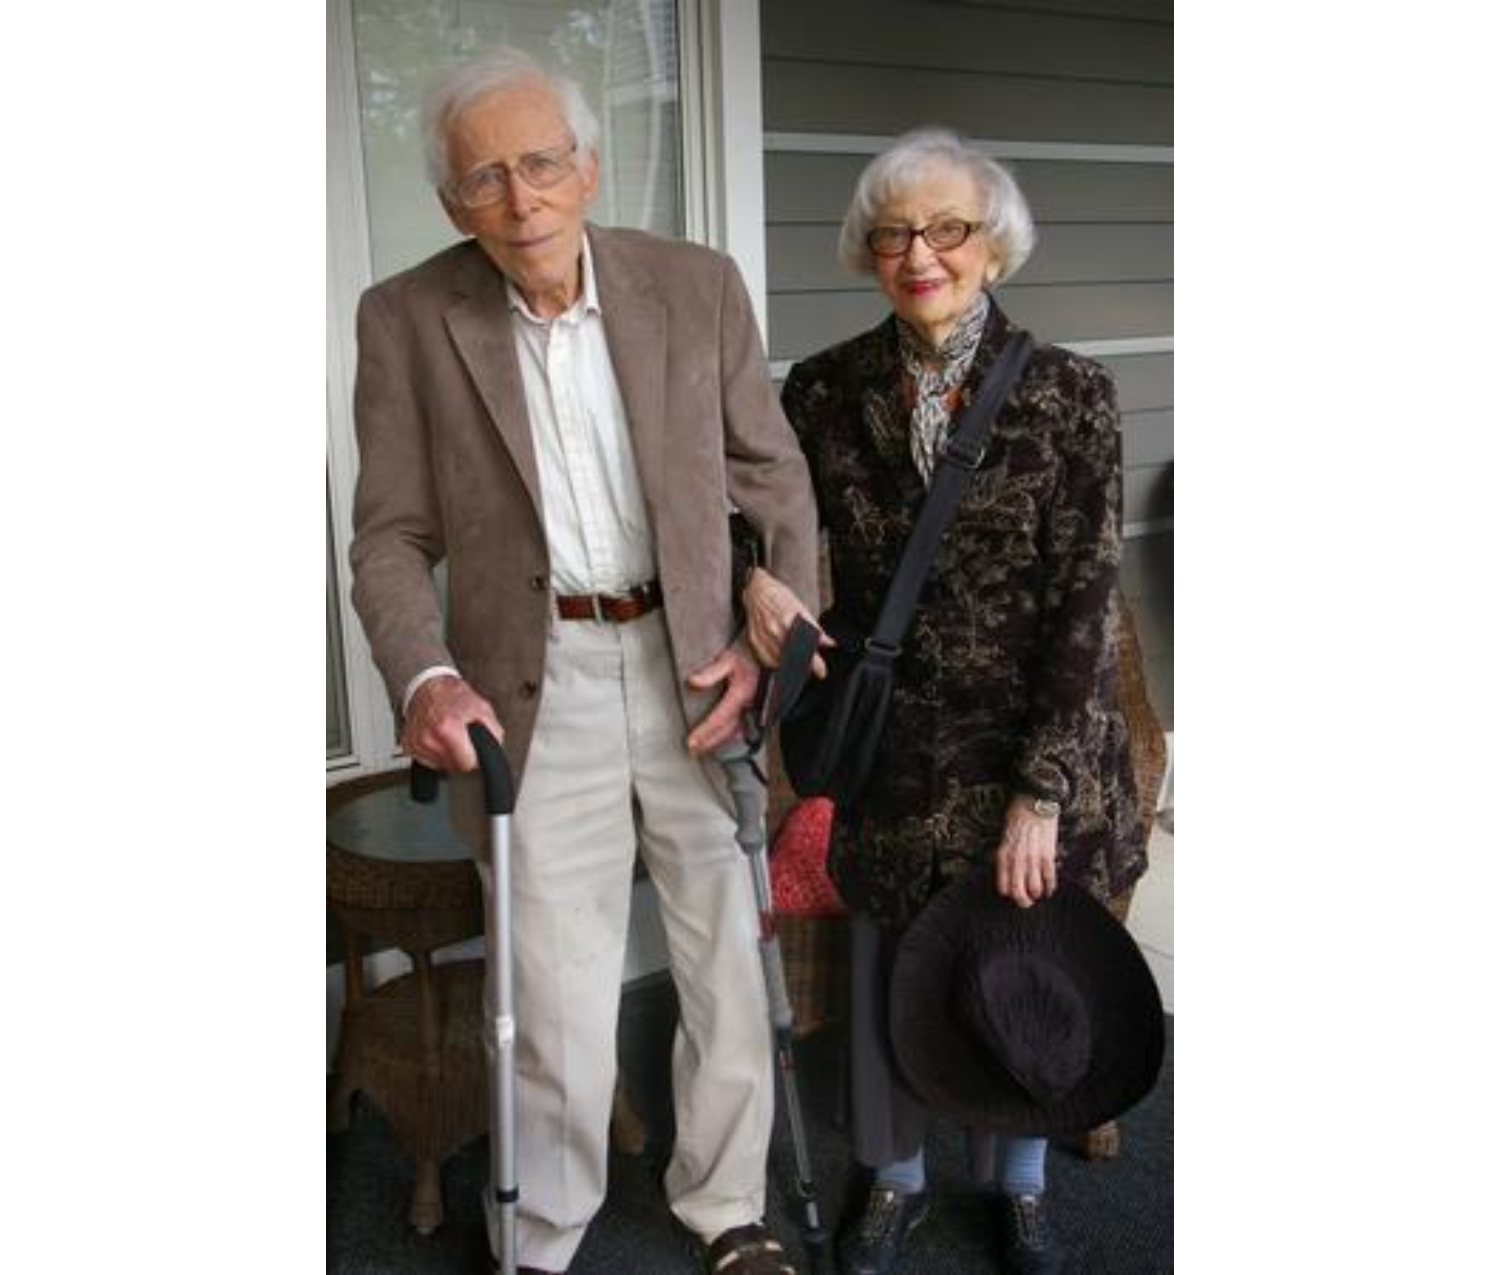 An image of an older man and older woman standing in front of a house. They are both holding canes and smiling at the camera.